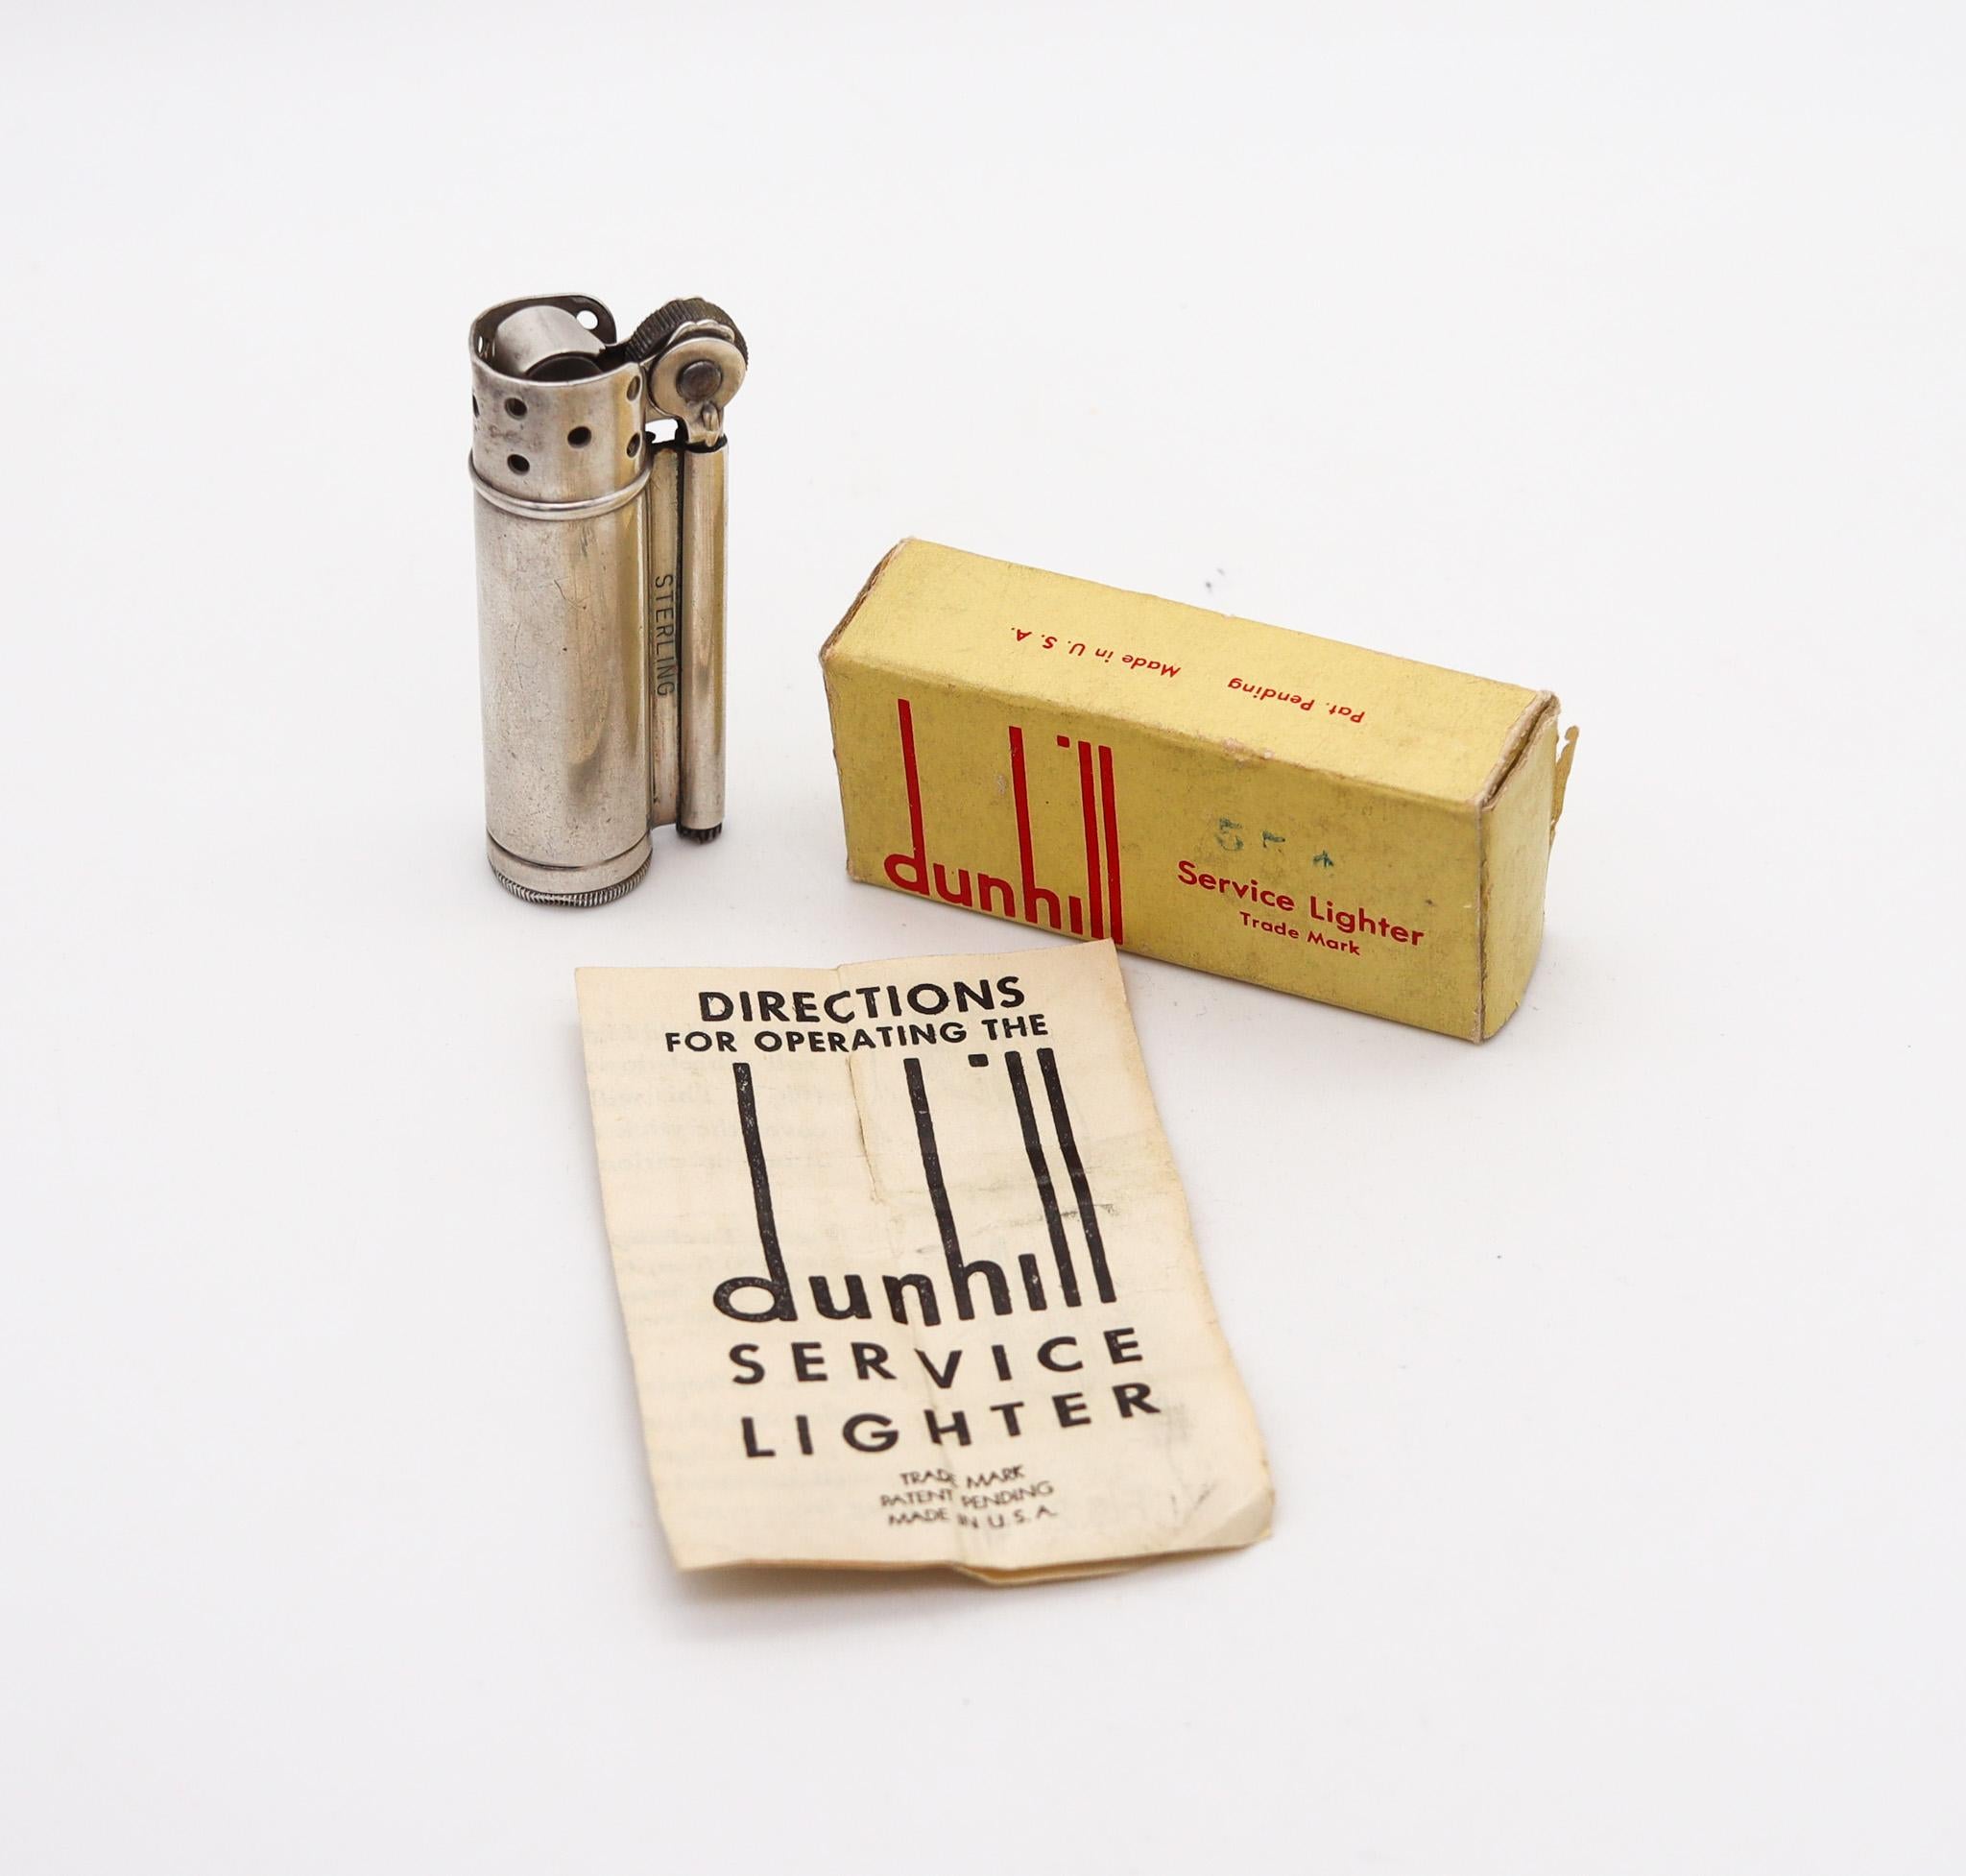 A service lighter designed by Alfred Dunhill

A beautiful military American service lighter, created by the subsidiaries of Alfred Dunhill in the United States during the WW-2, between the 1944 and 1947. This pocket petrol lighter was originally